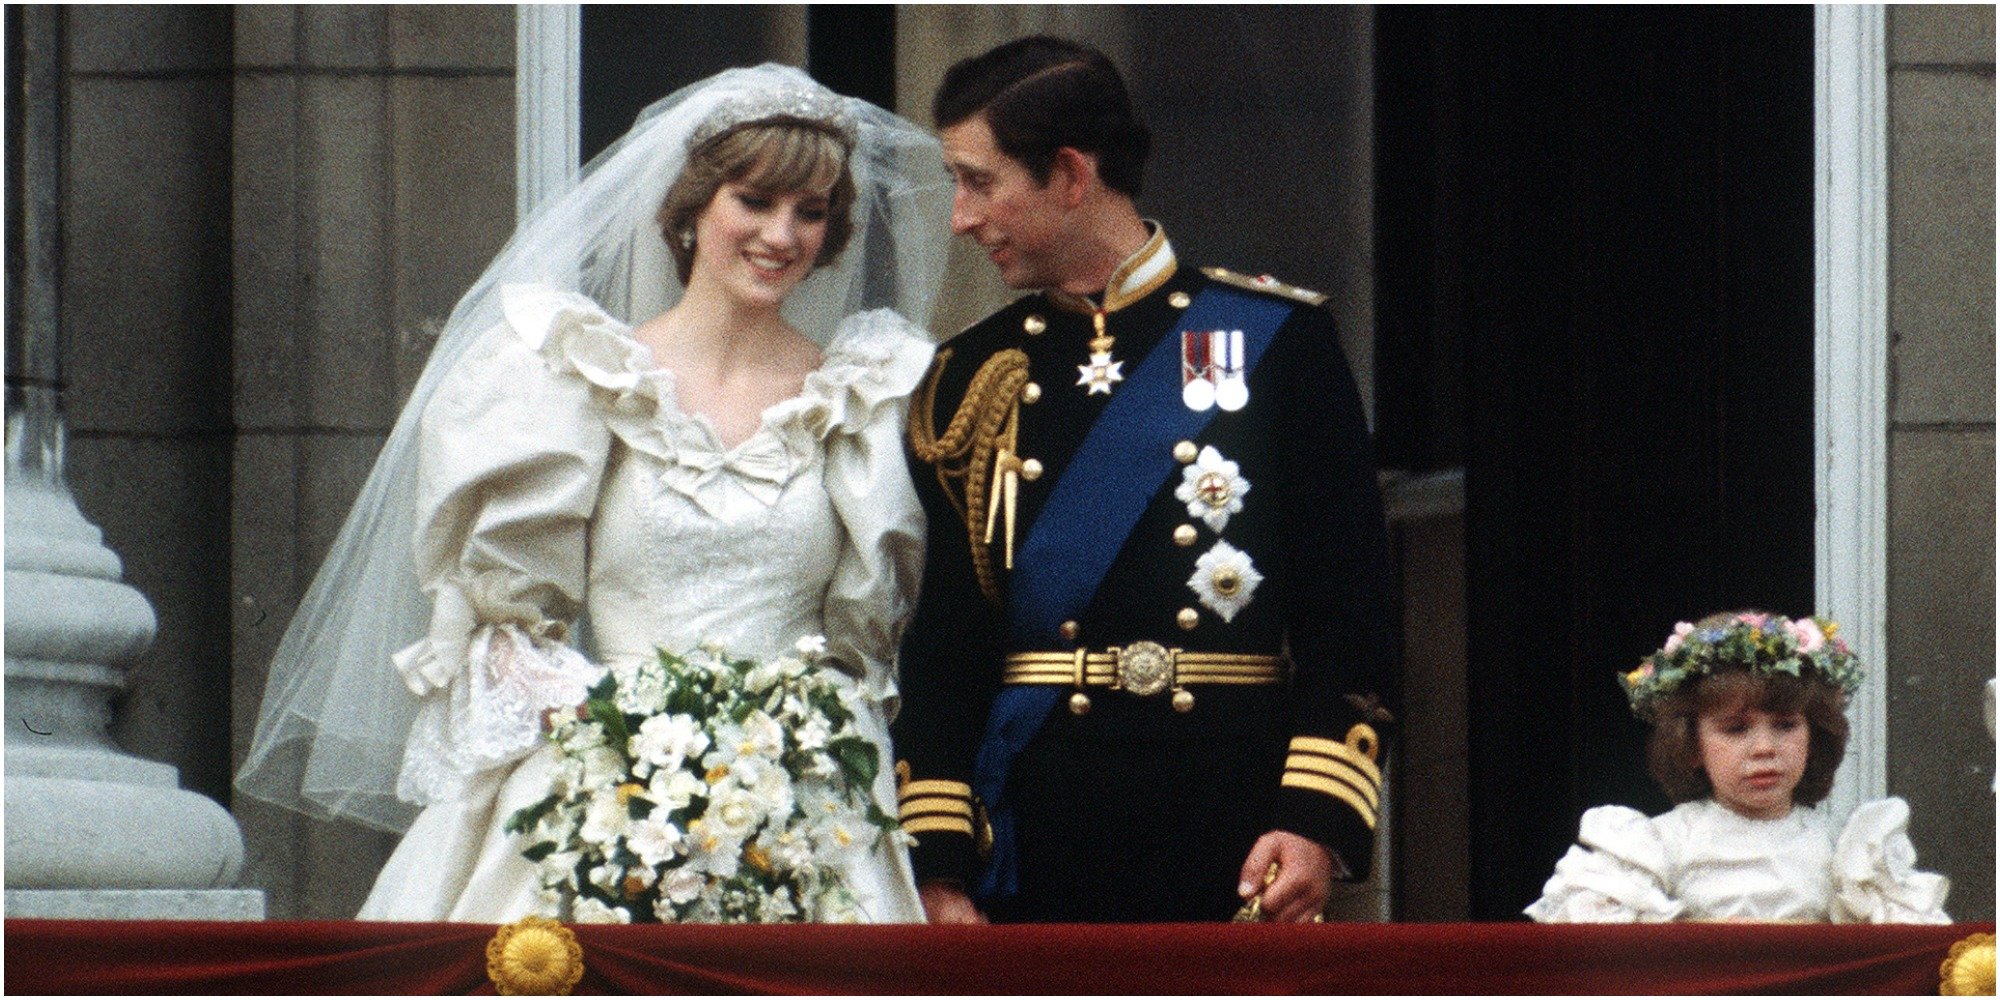 Princess Diana Challenged Camilla Parker Bowles on Her Wedding Day